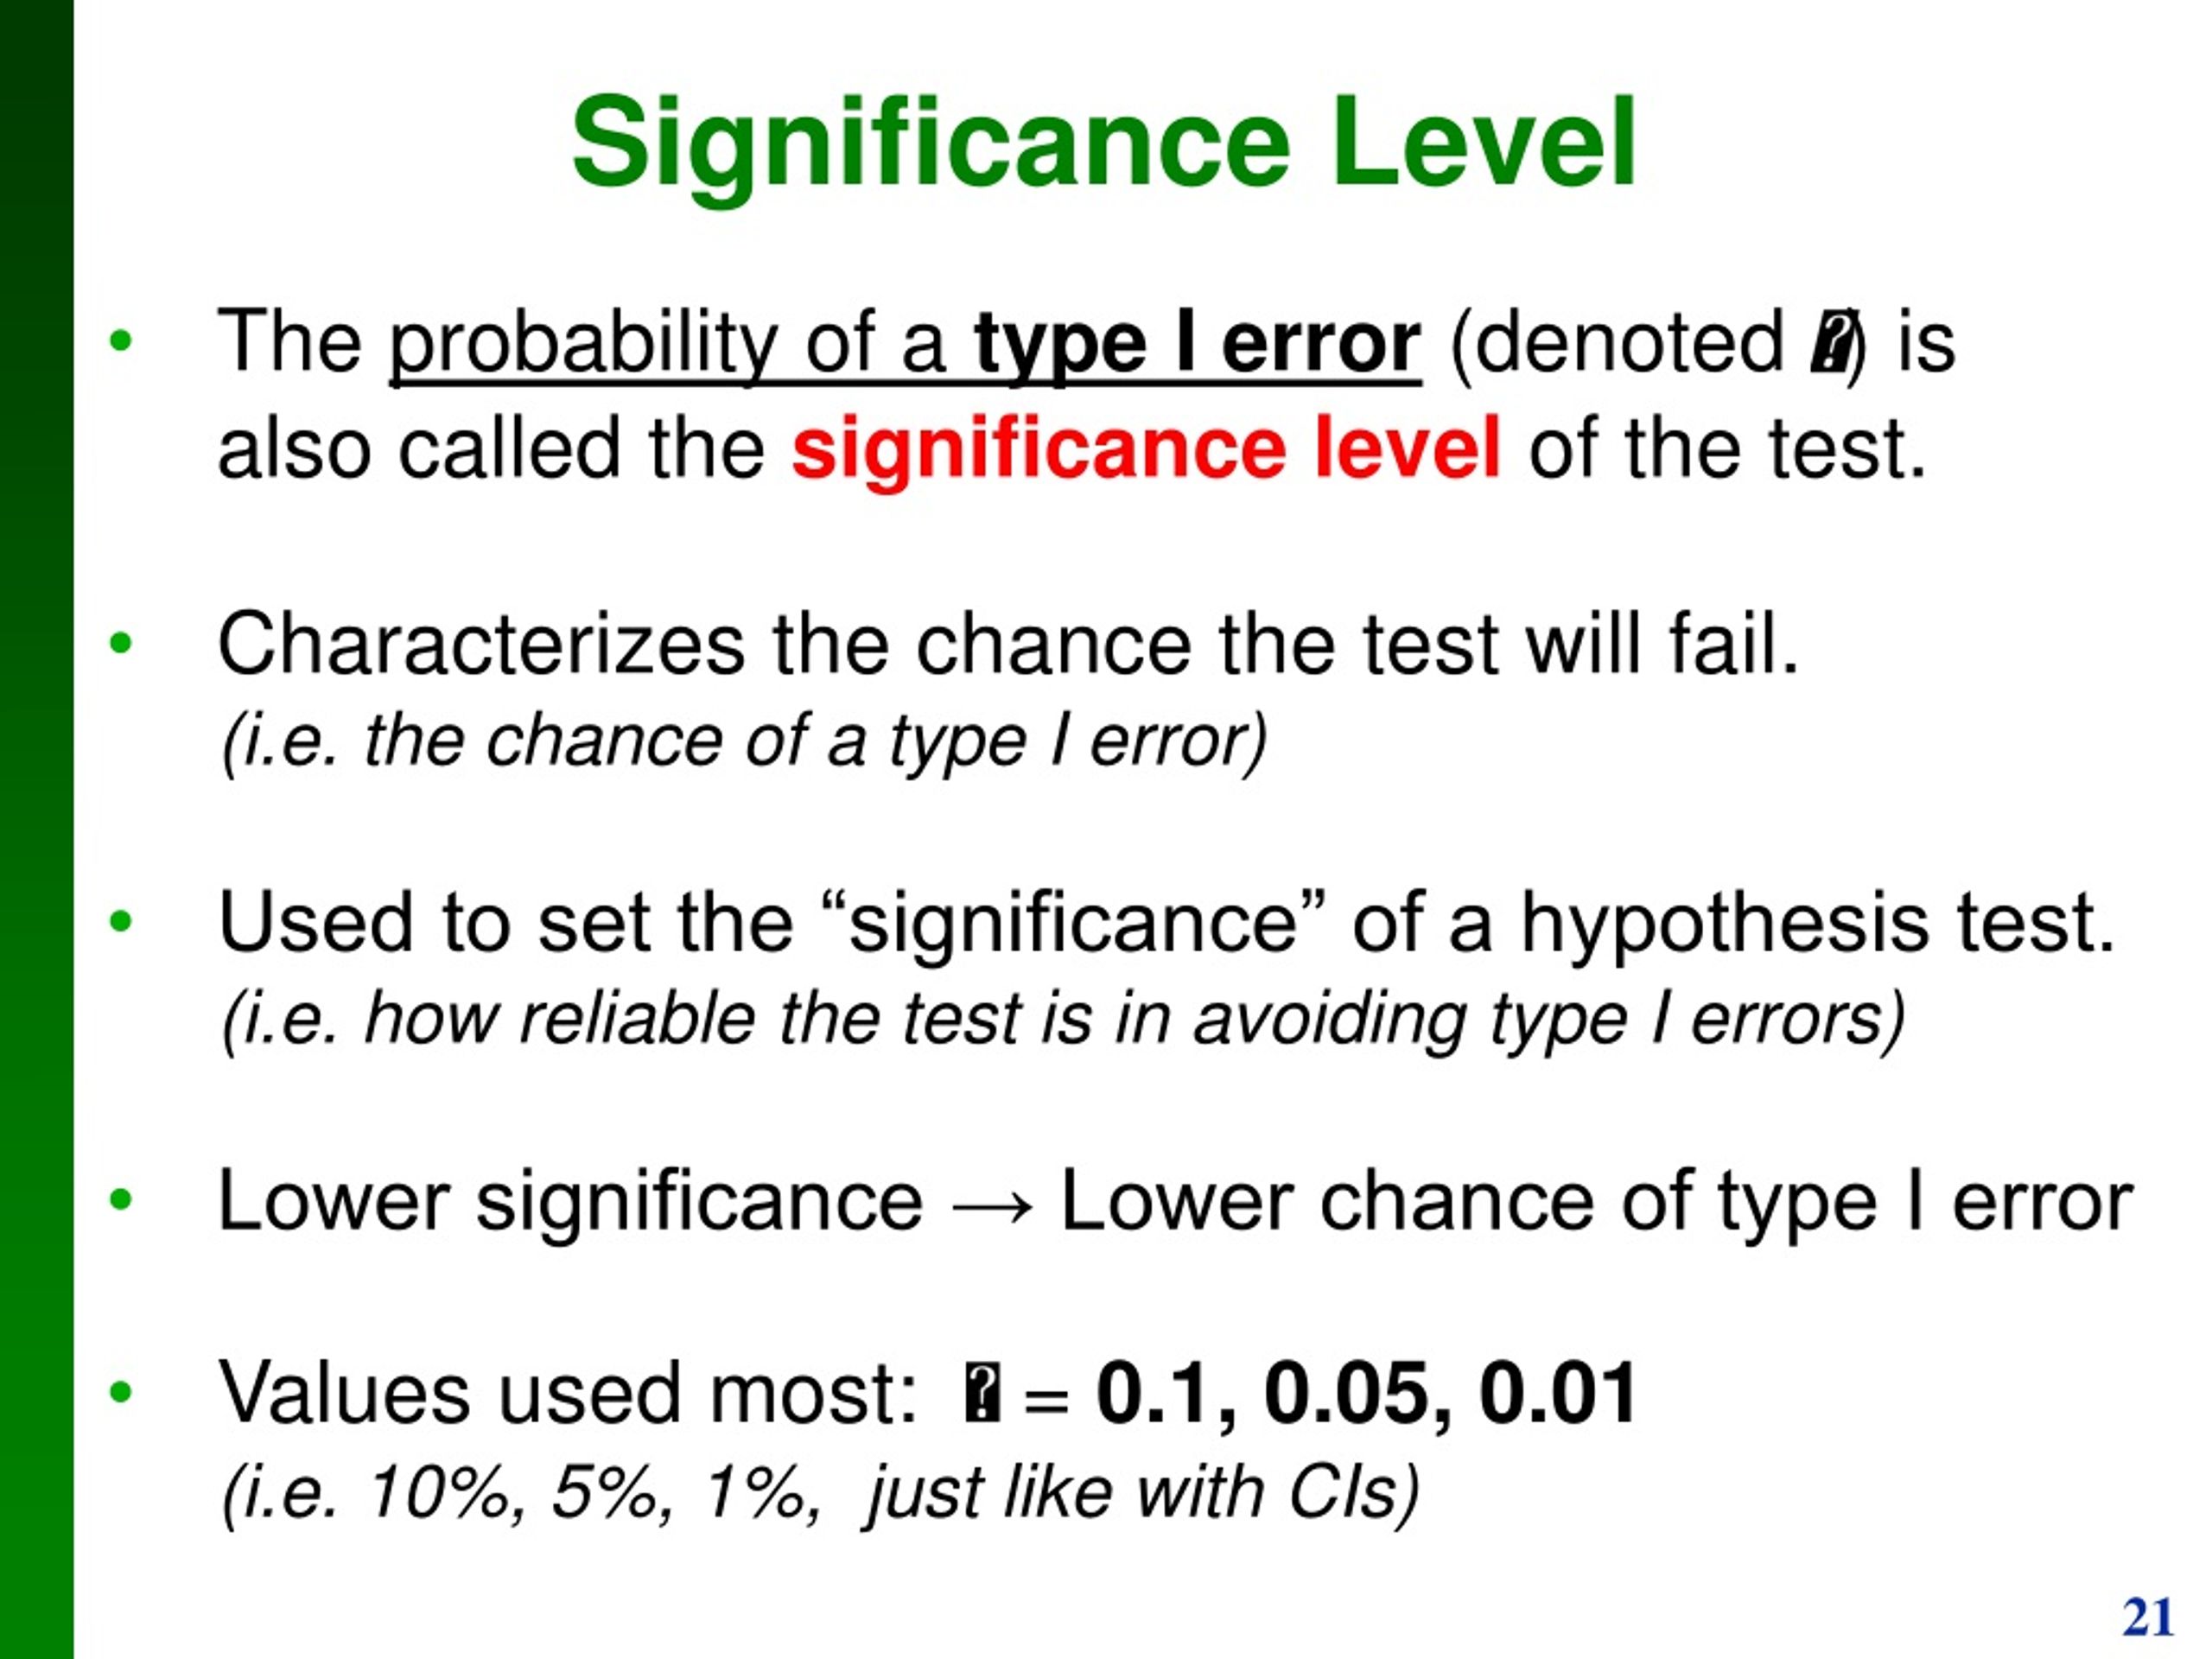 hypothesis test significance level